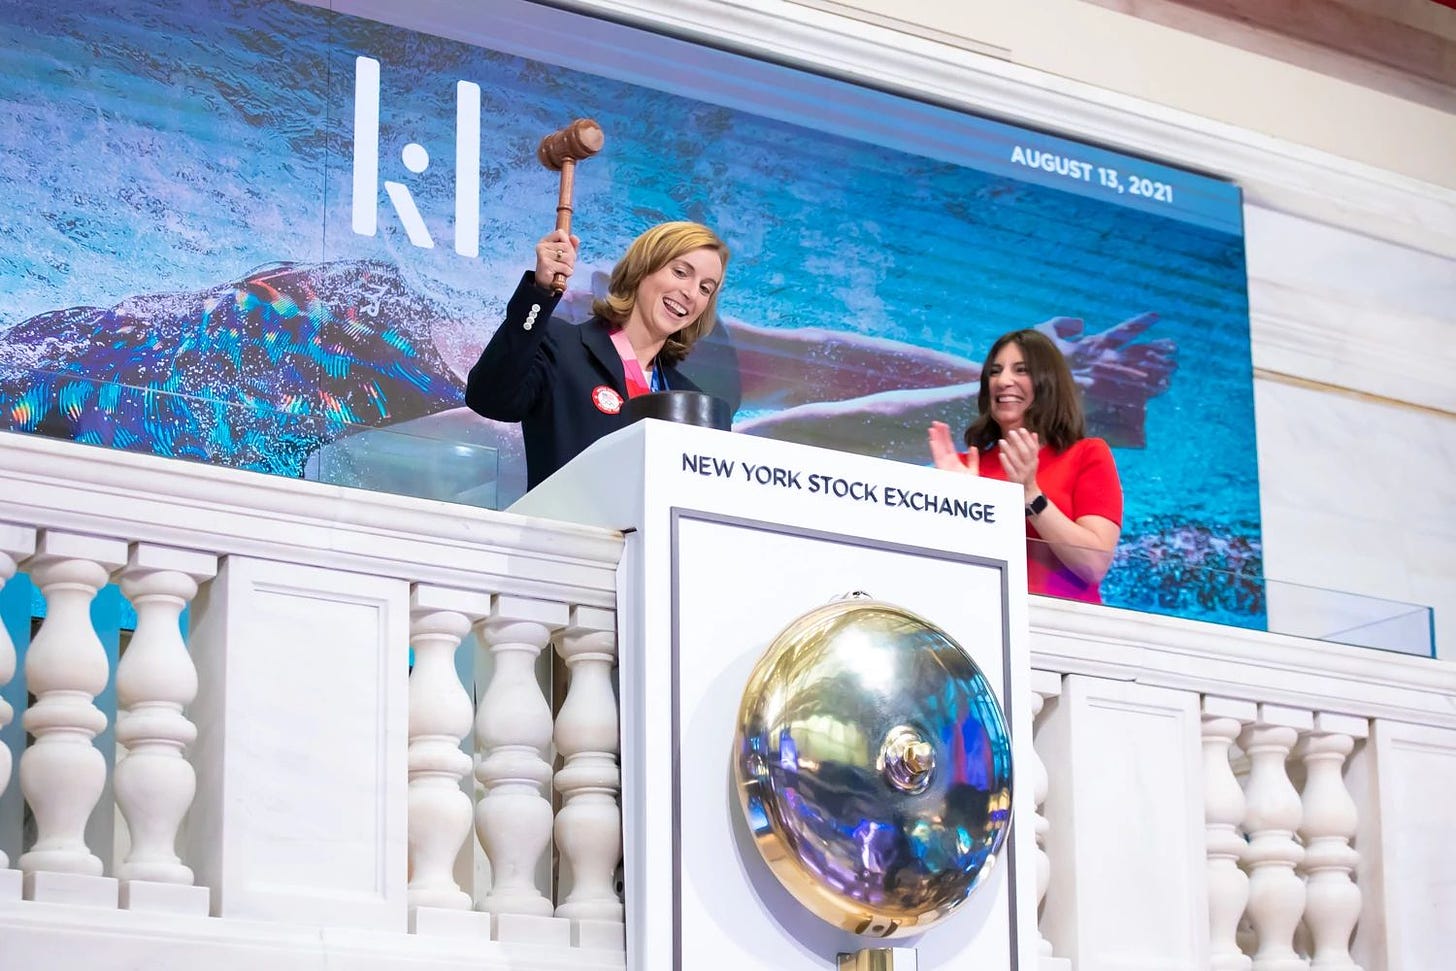 Taking Stock: What It's Really Like to Ring the NYSE Bell